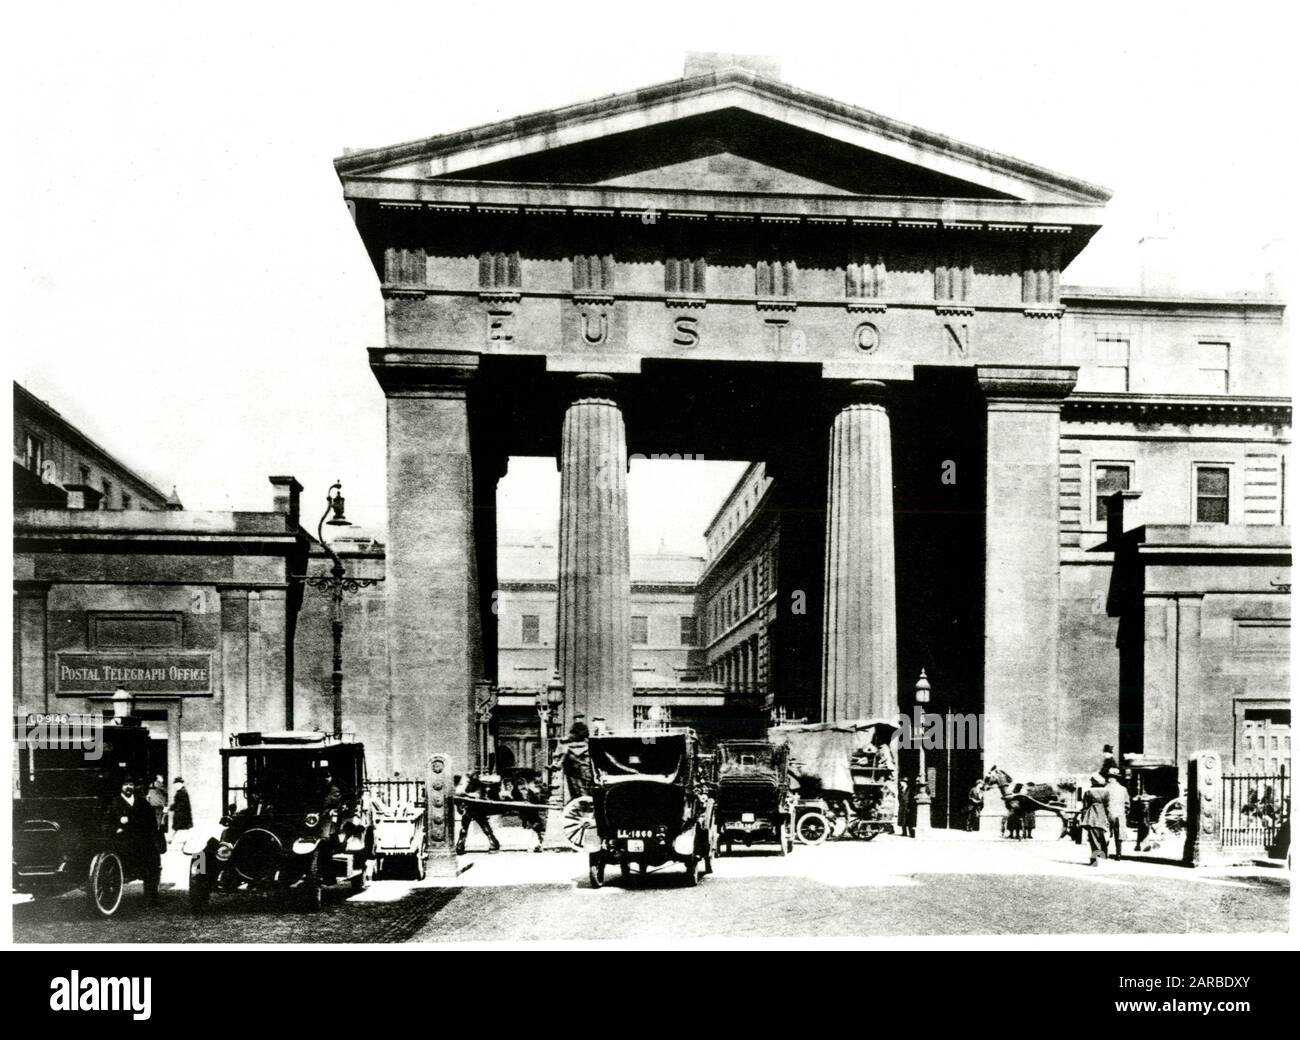 The Euston Arch an original entrance to the Euston railway station, designed by Philip Hardwick in late 1830s, London     Date: 1900 Stock Photo